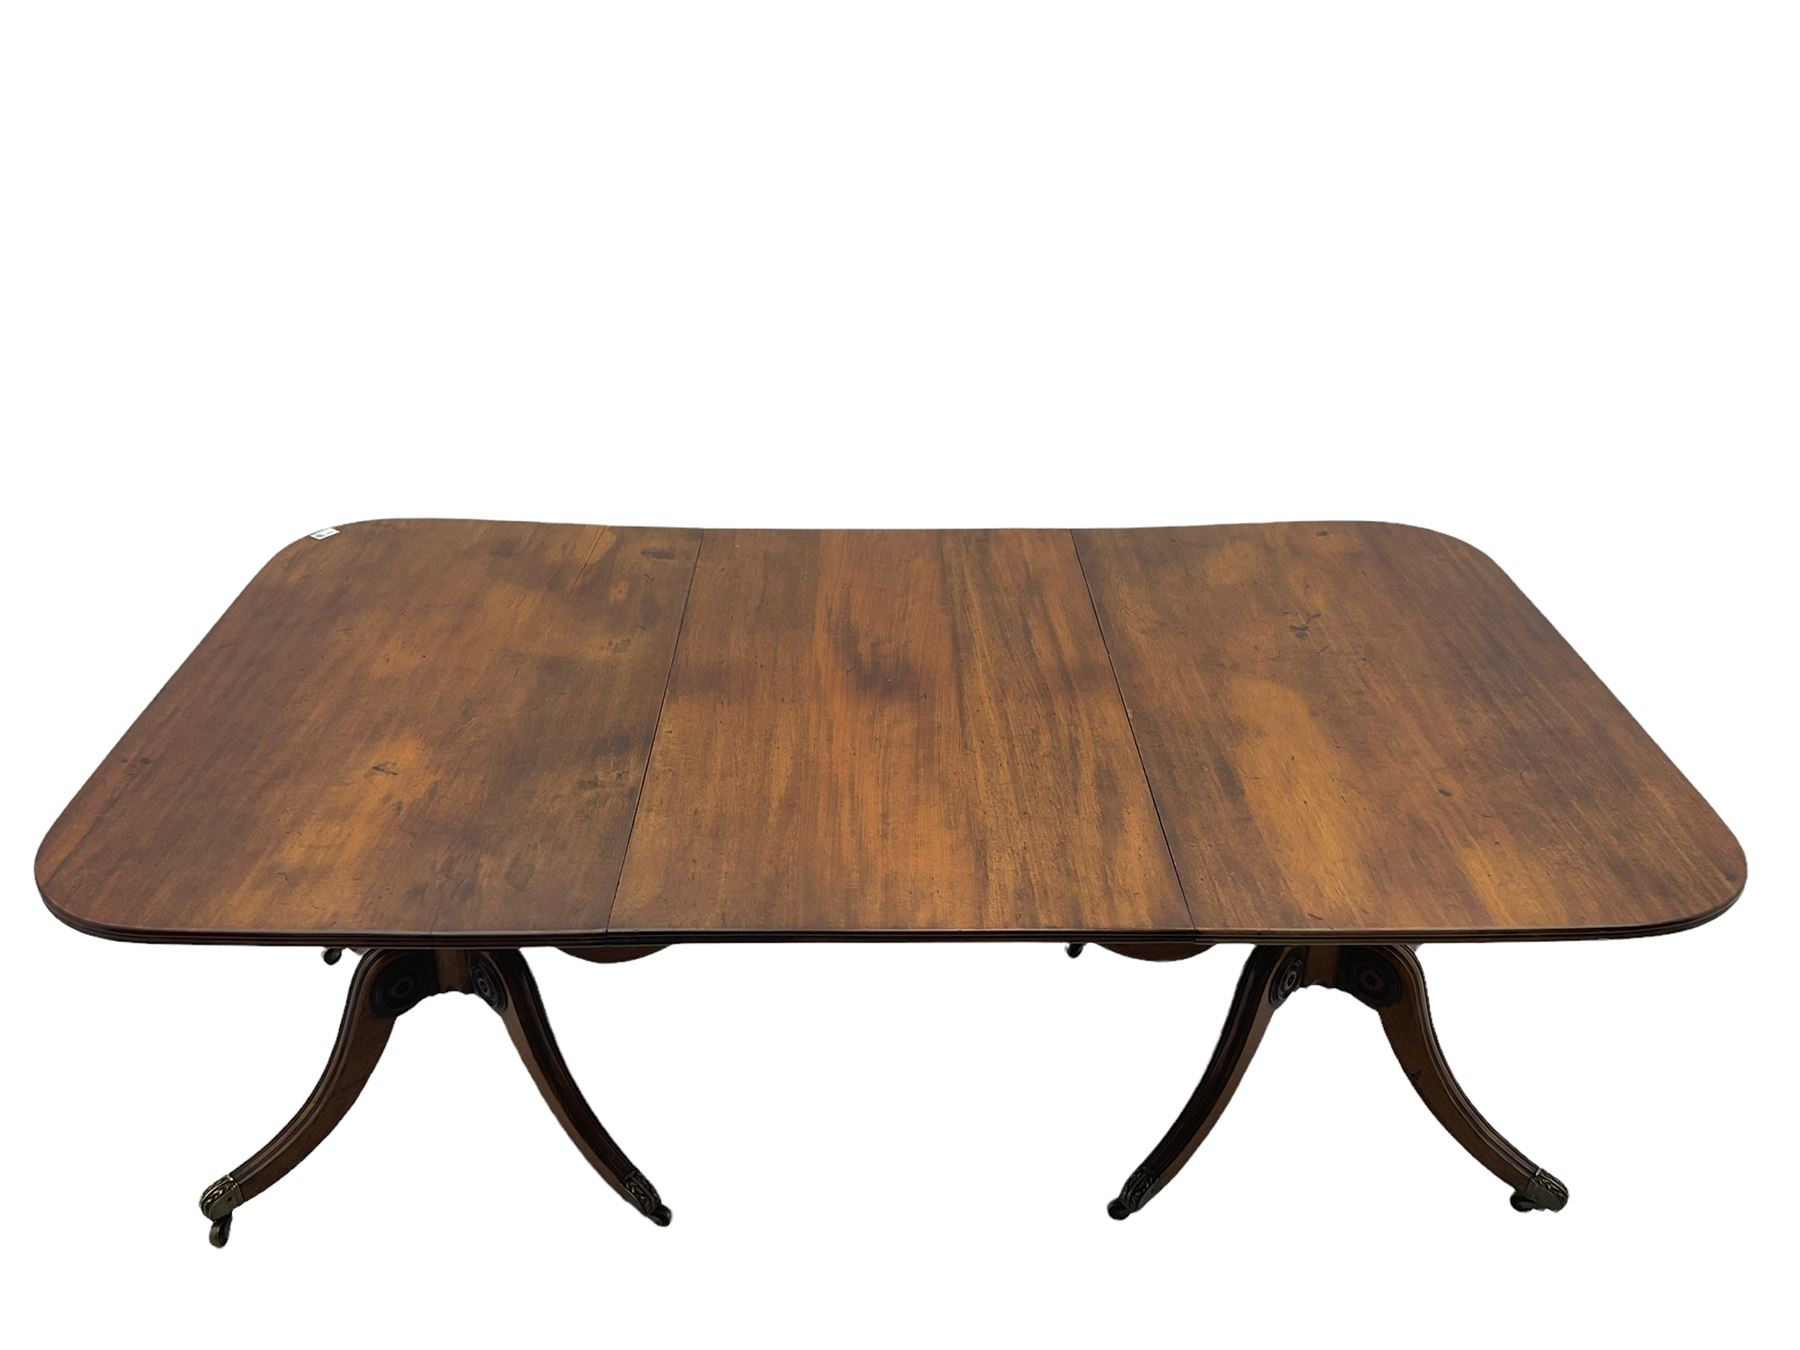 Early 19th century mahogany extending dining table - Image 6 of 9